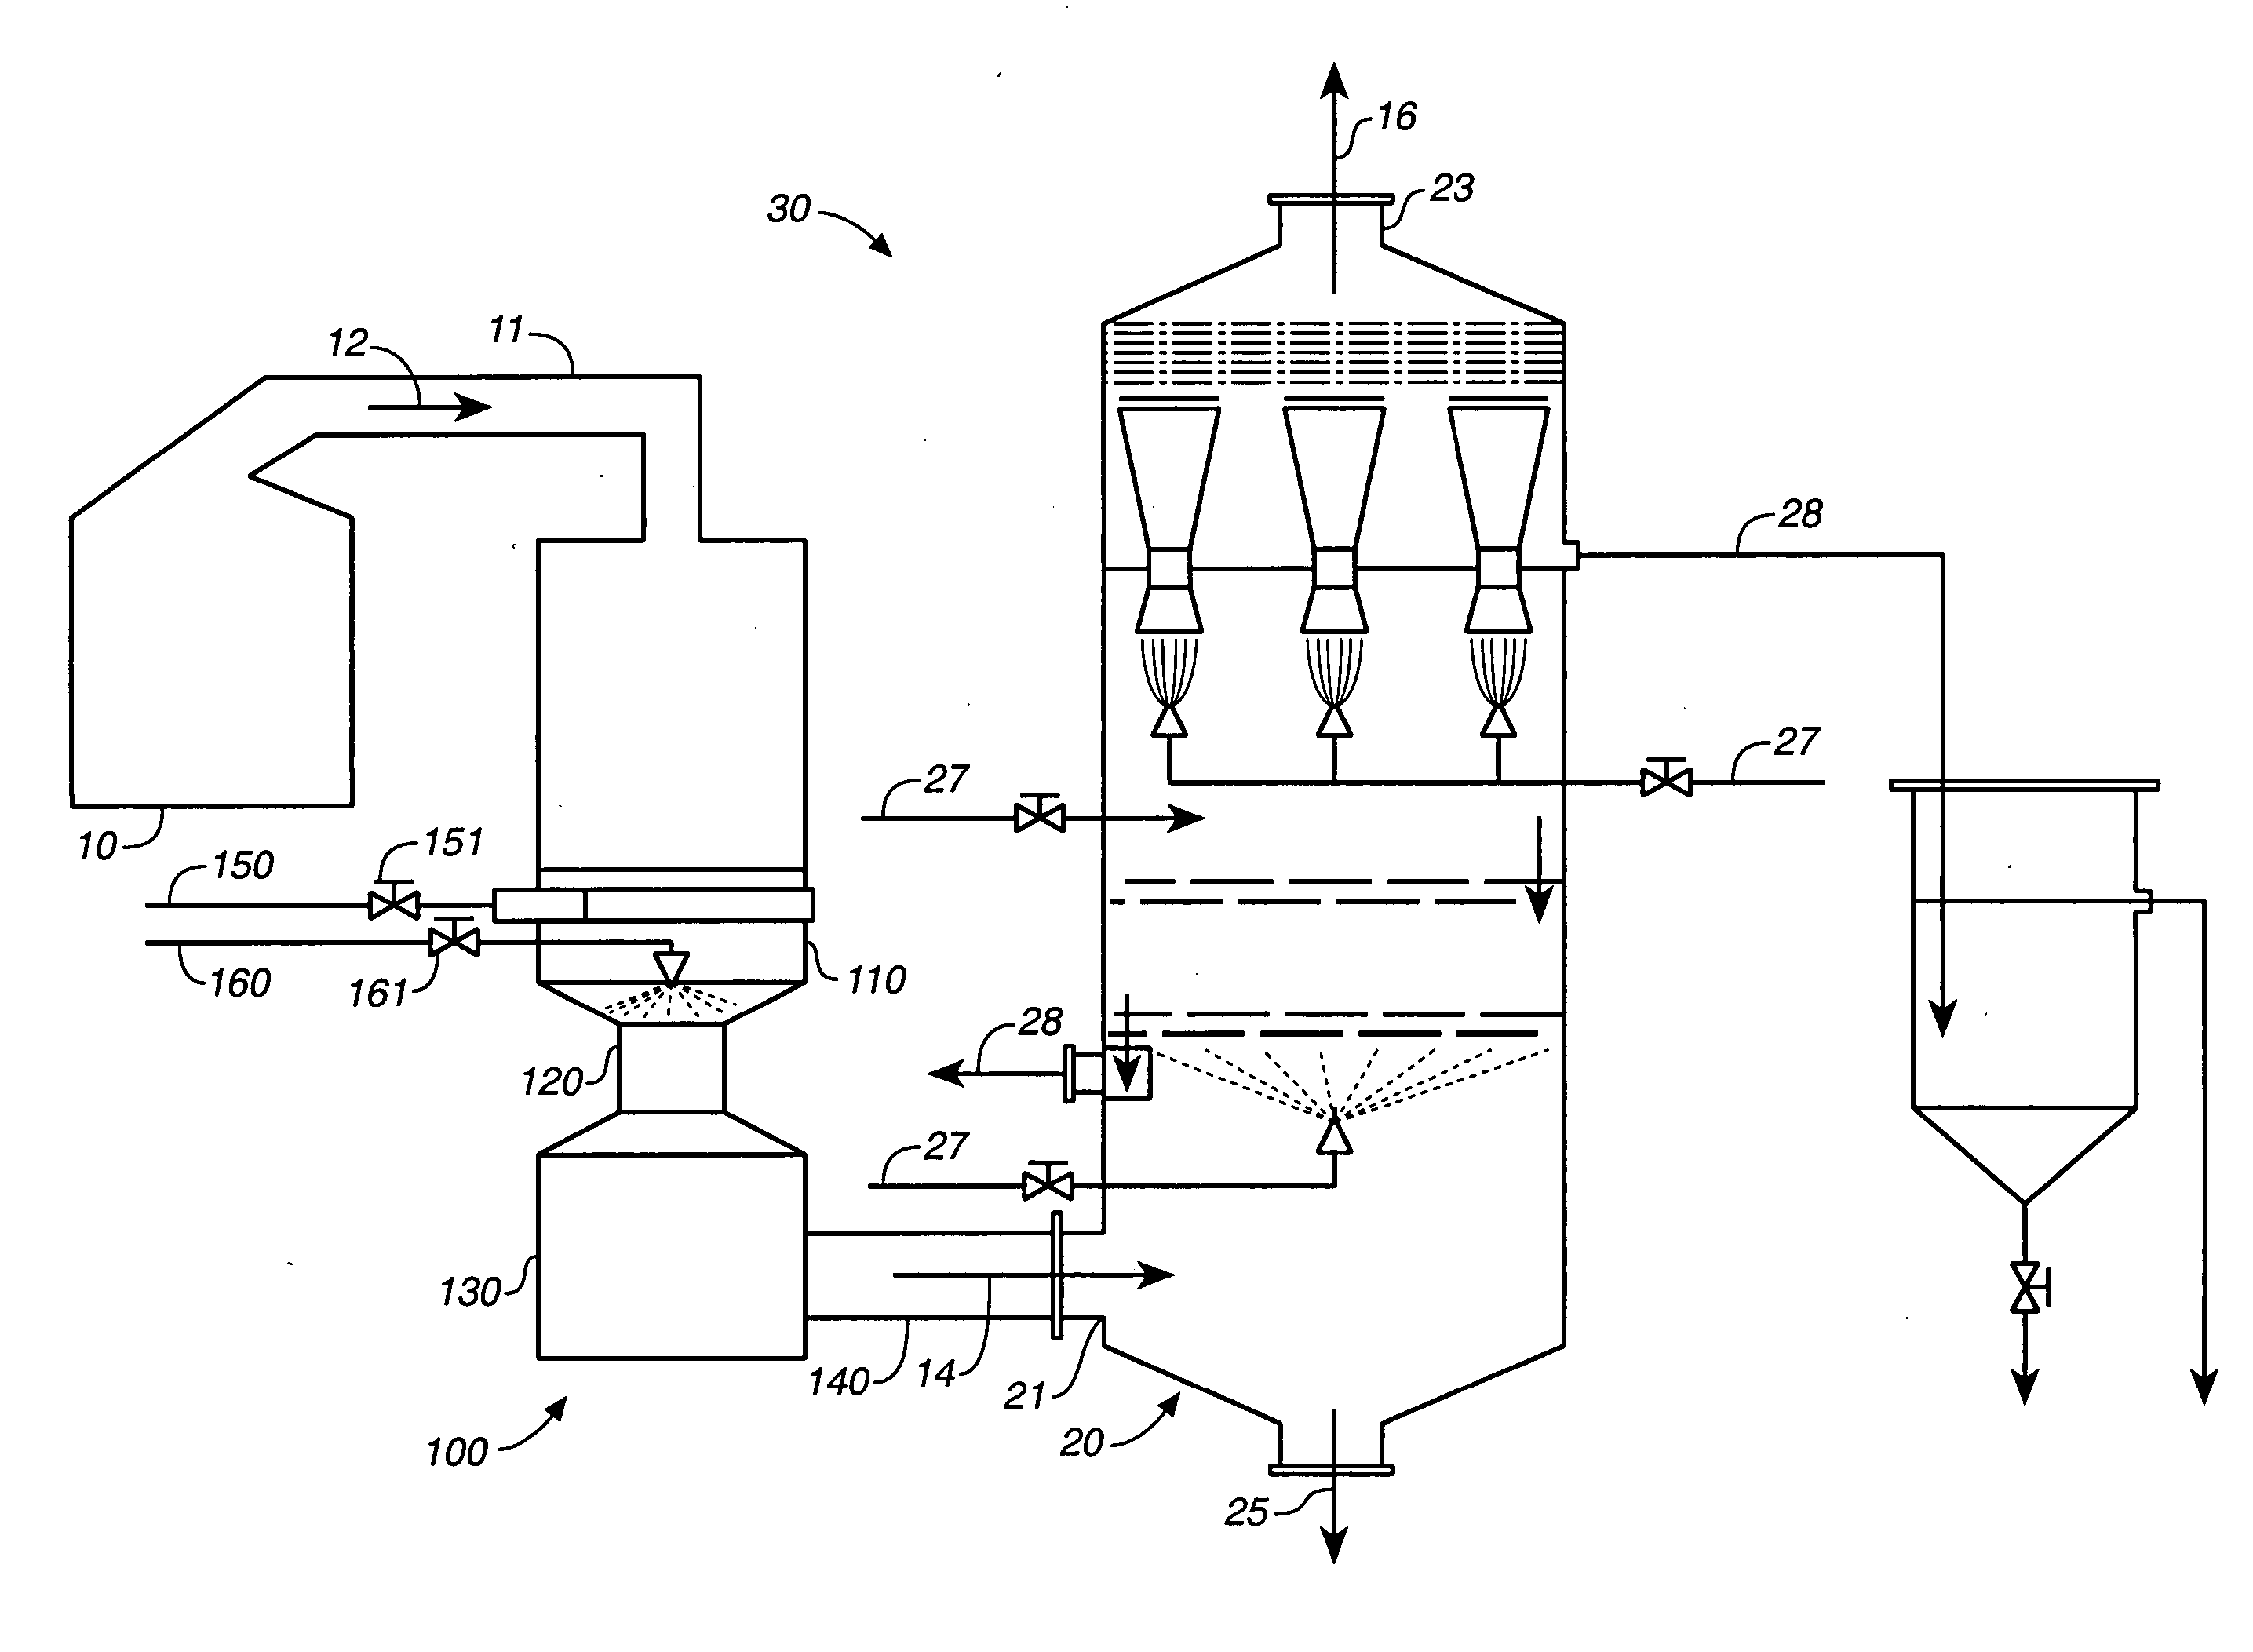 Low-energy venturi pre-scrubber for an air pollution control system and method